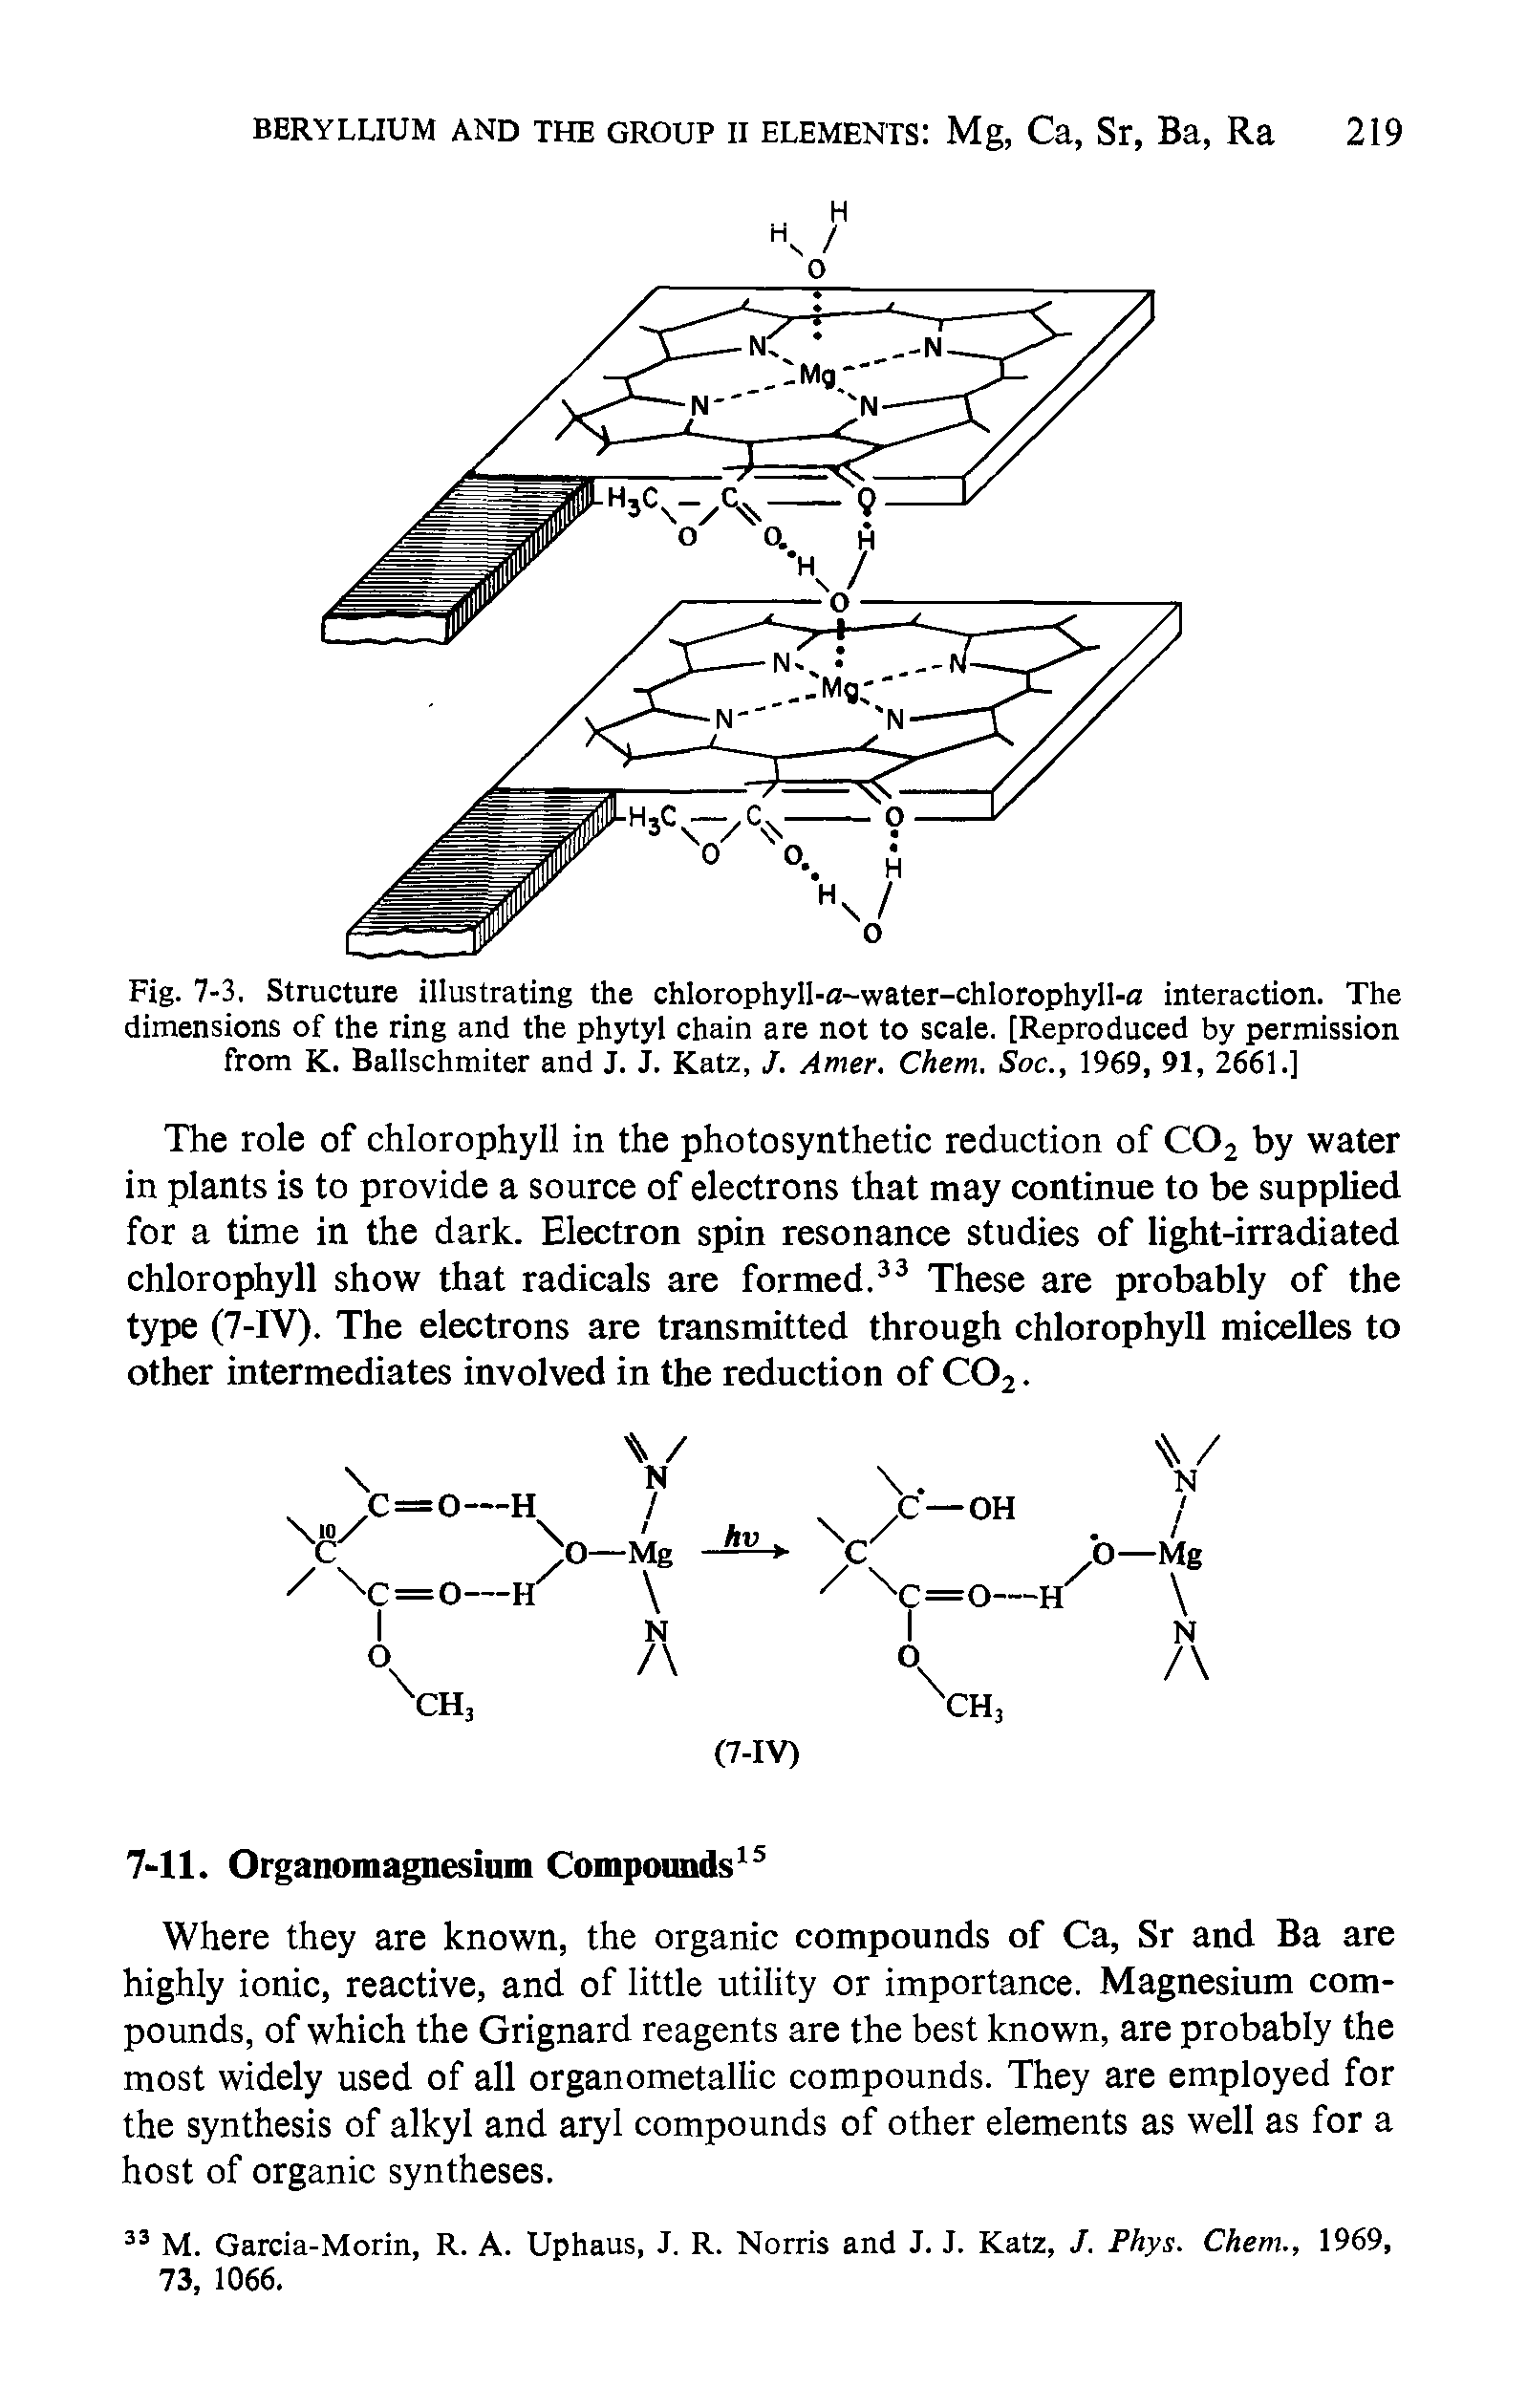 Fig. 7-3, Structure illustrating the chlorophyll-a-water-chlorophyll-a interaction. The dimensions of the ring and the phytyl chain are not to scale. [Reproduced by permission from K. Ballschmiter and J. J. Katz, J. Amer. Chem. Soc., 1969, 91, 2661.]...